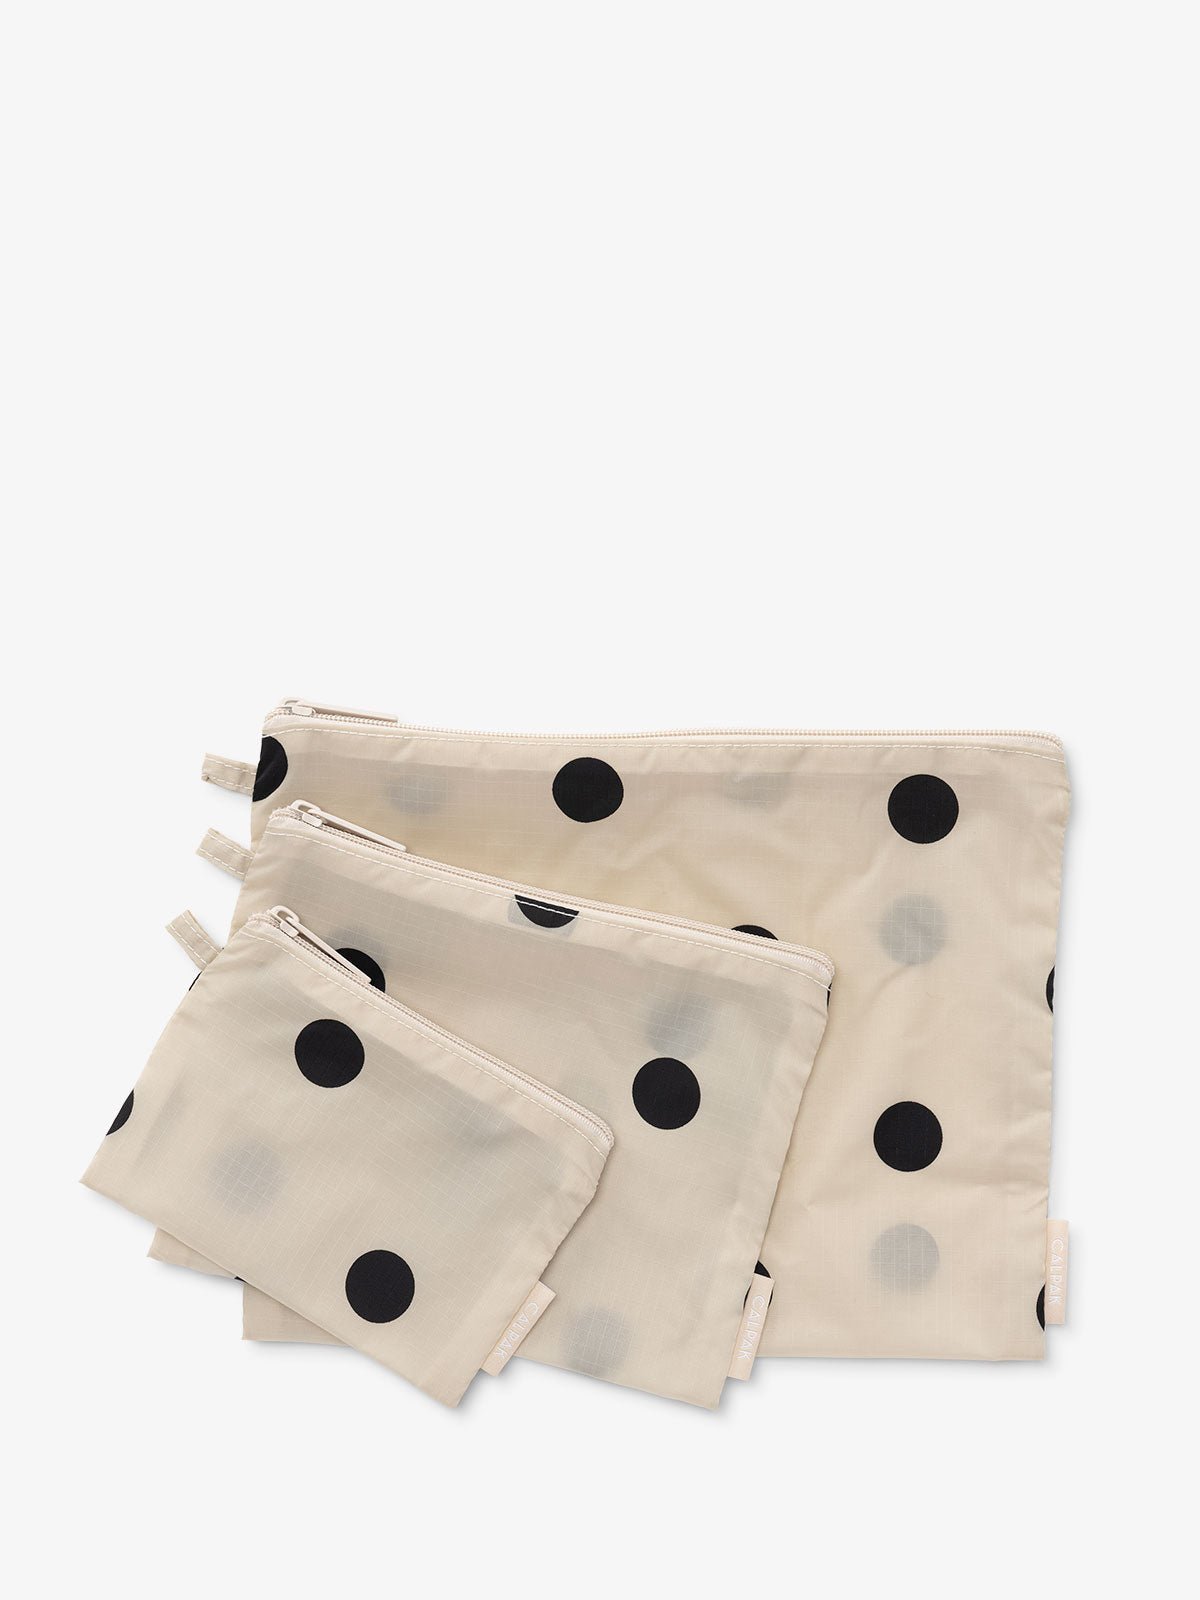 Set of small bags for storage and travel in polka-dot